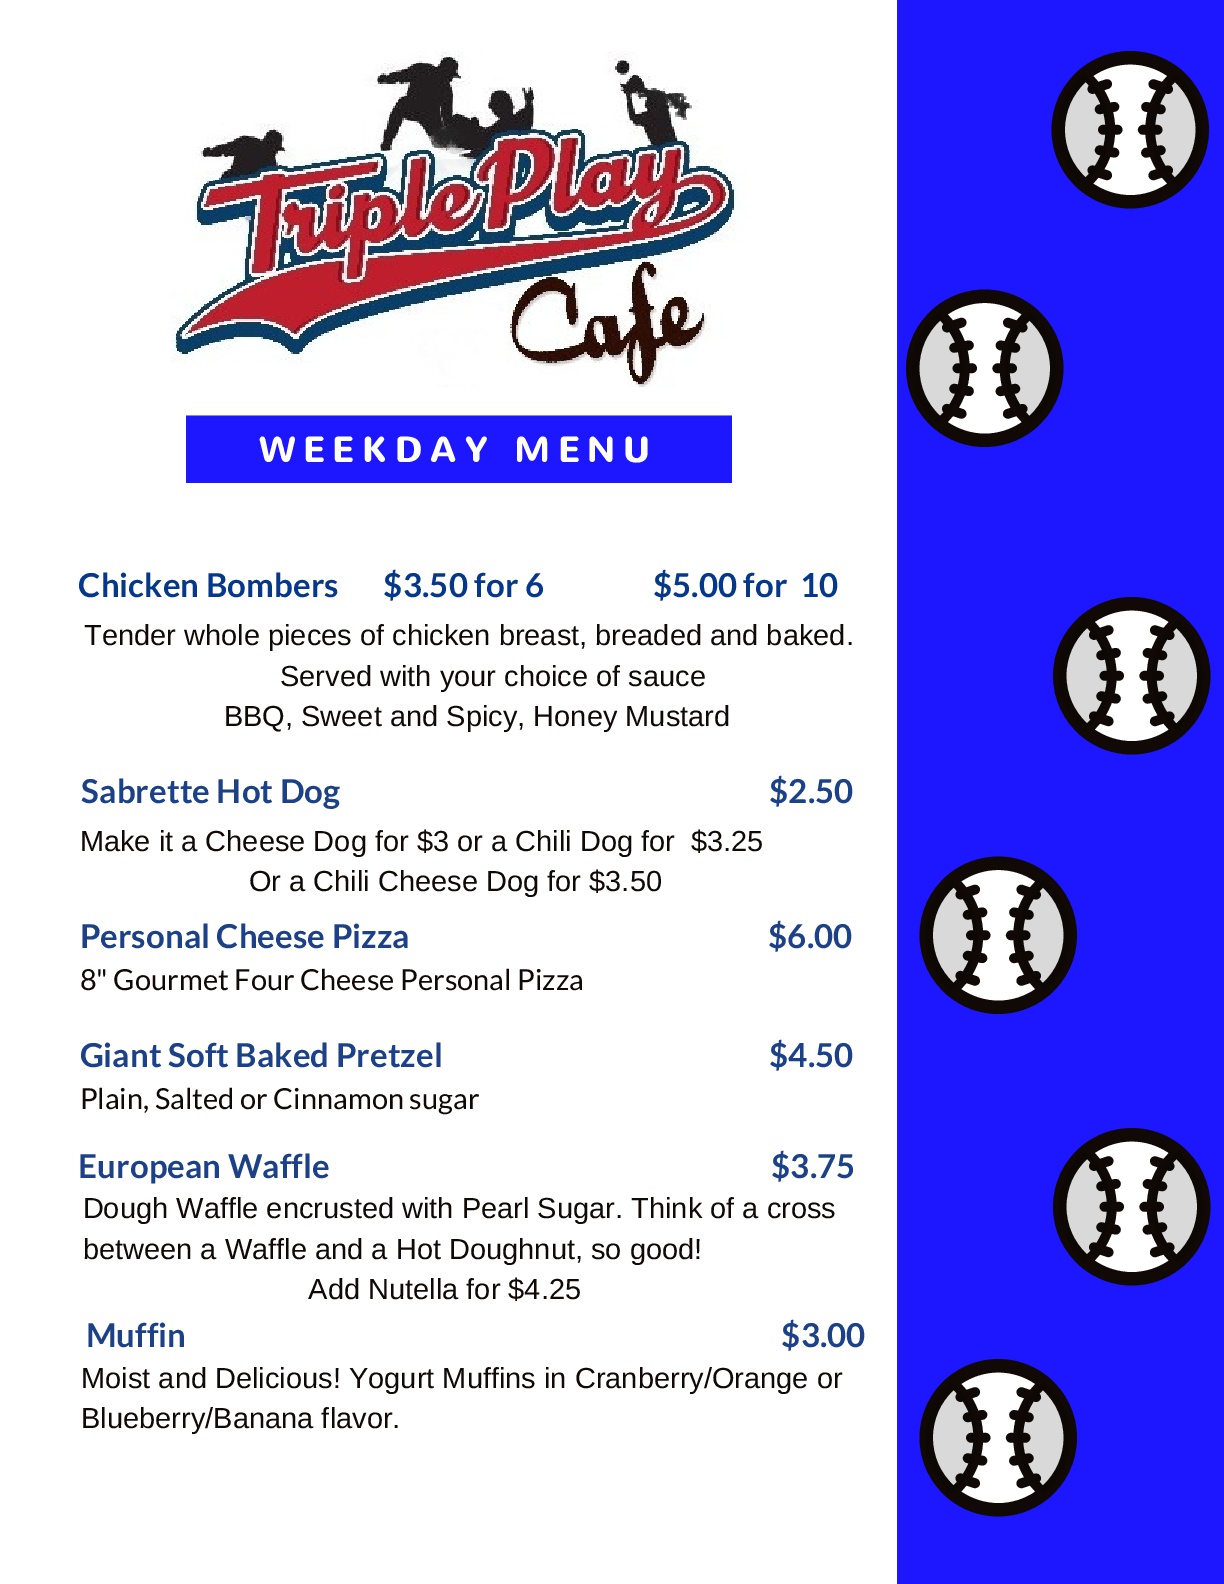 Triple Play Cafe Weekday Menu - Frozen Ropes Chester, NY